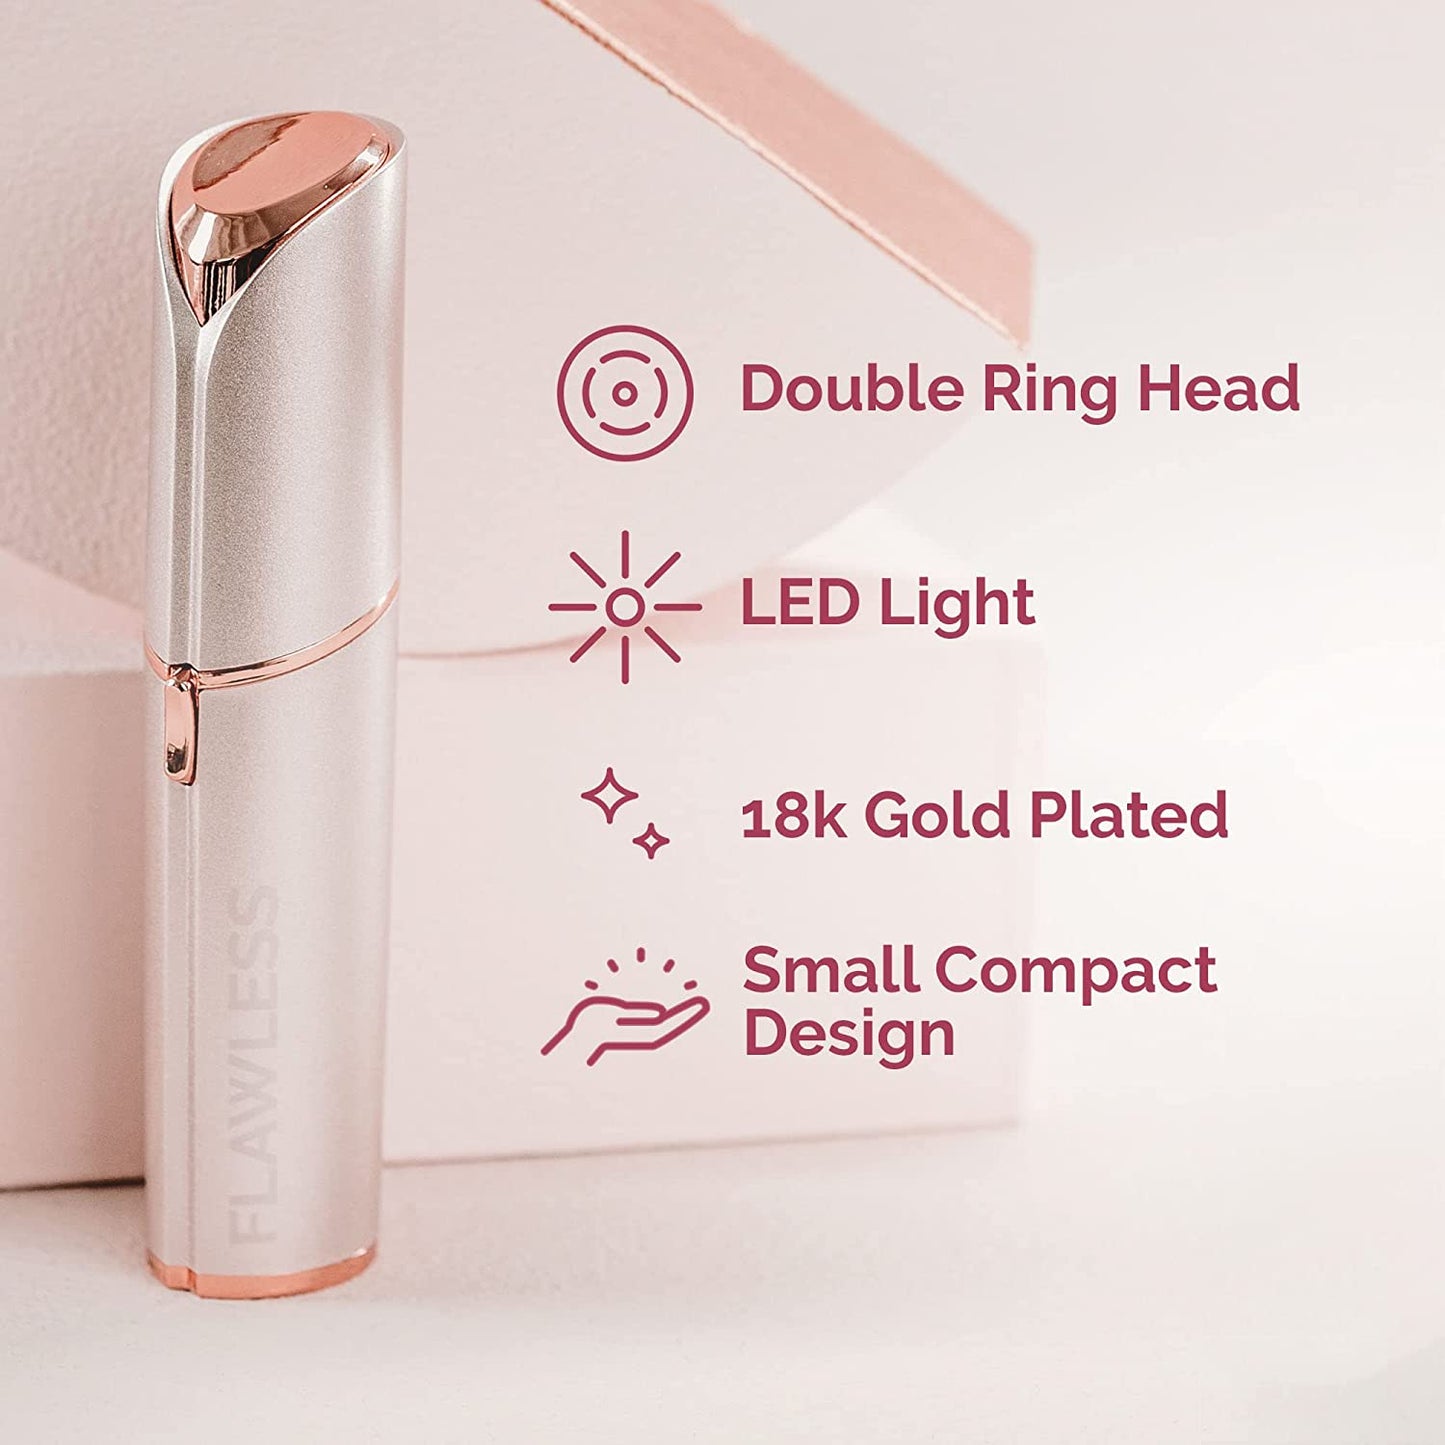 FINISHING TOUCH Flawless Women's Painless Hair Remover, Mermaid/Rose Gold